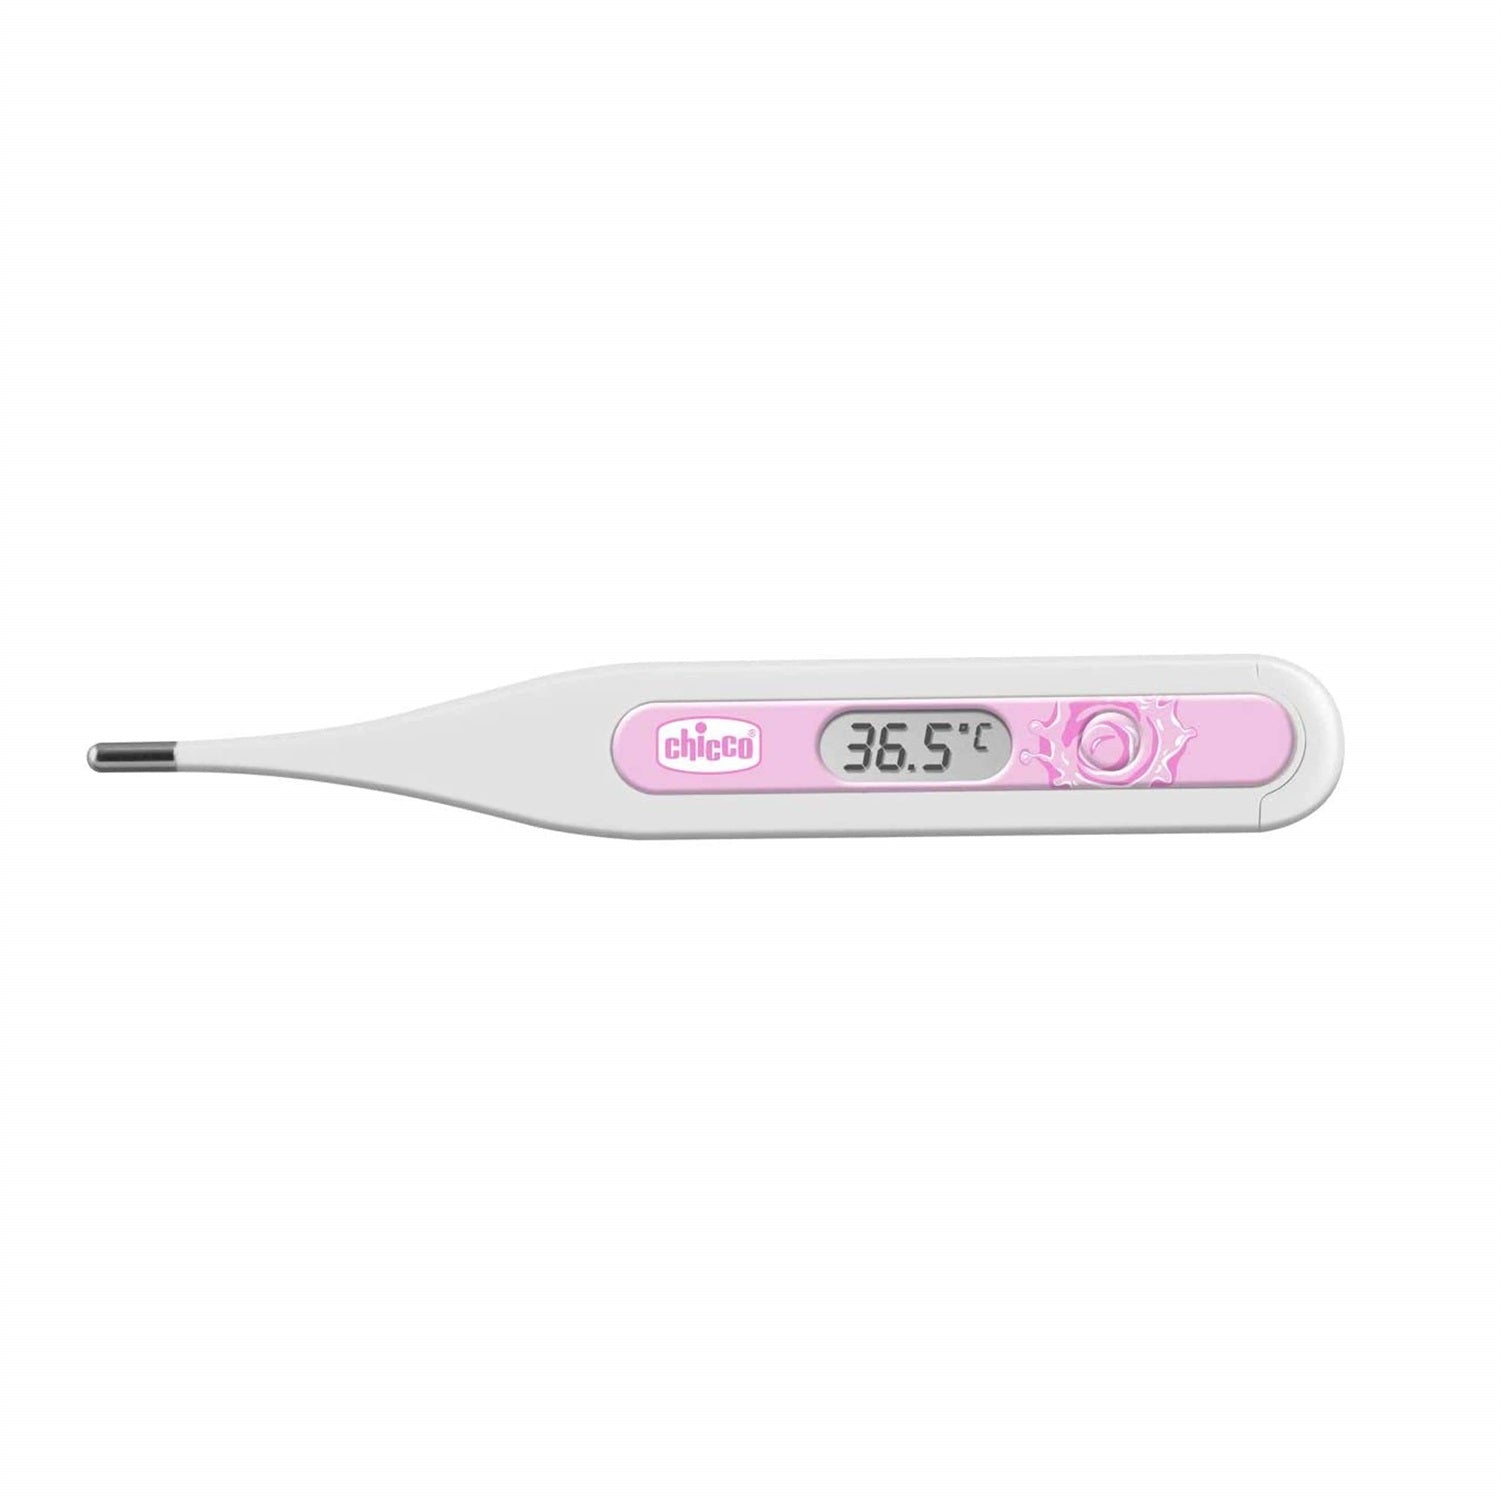 Flexible tip digital thermometer